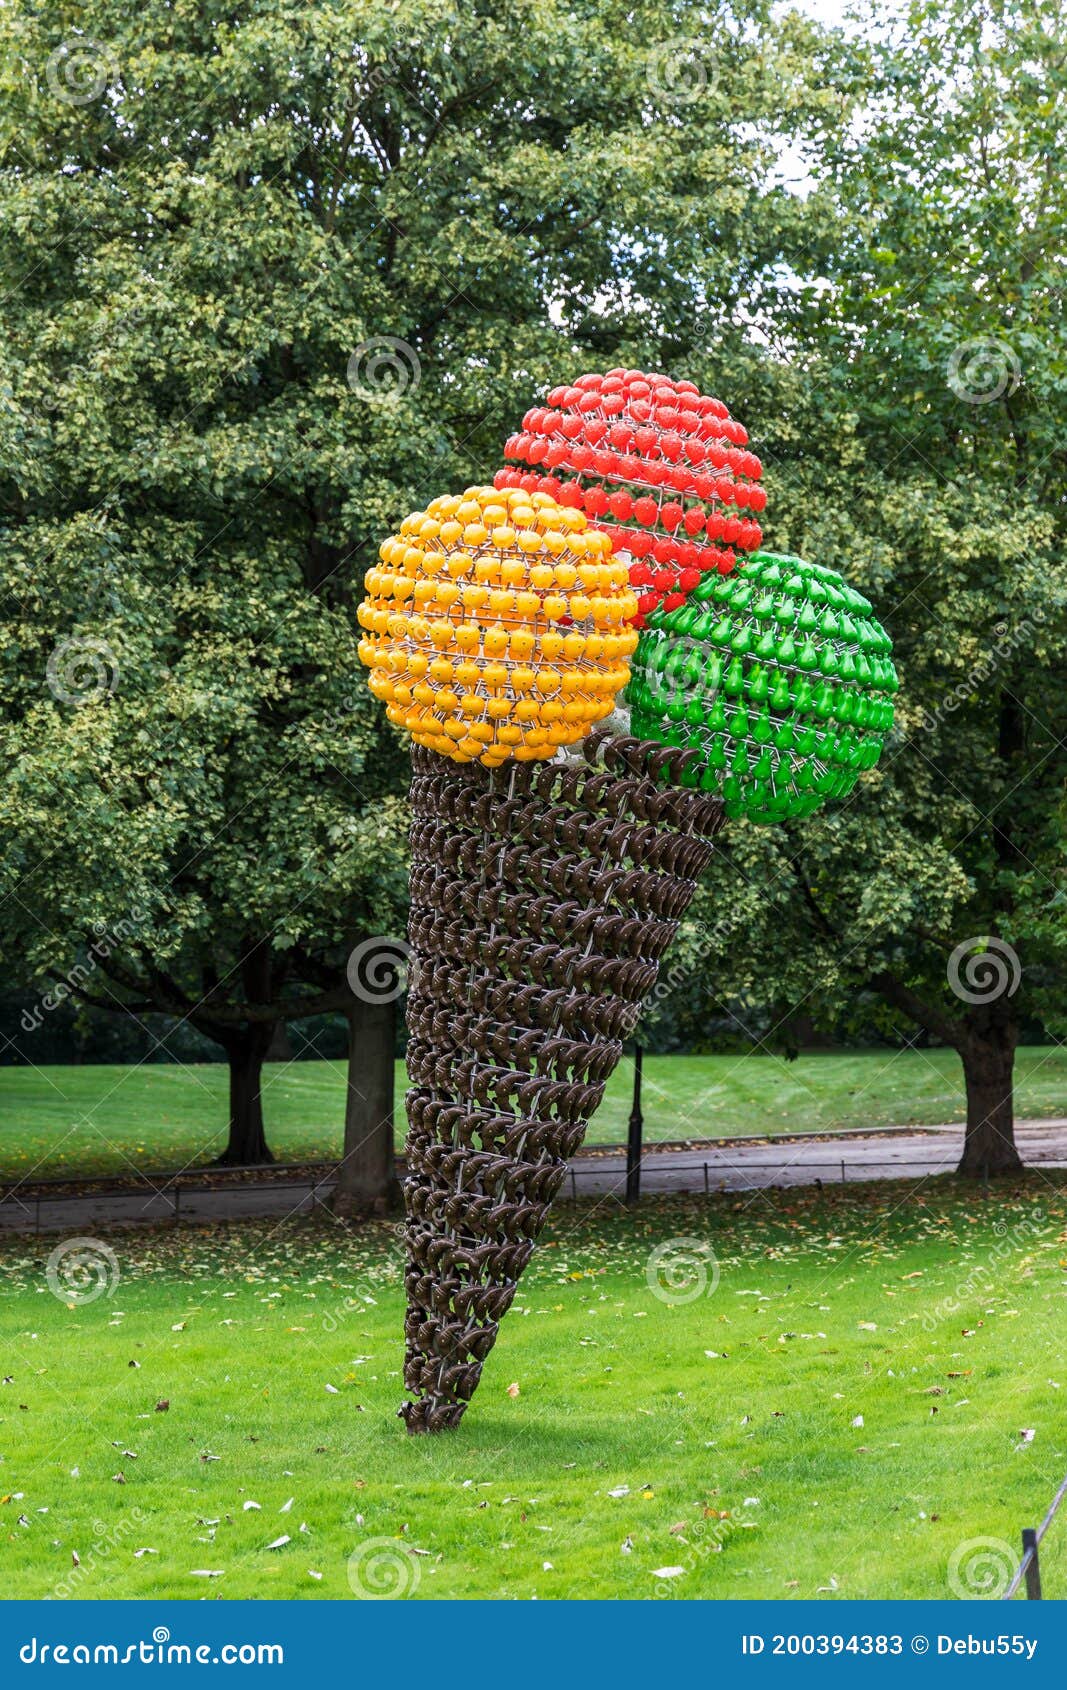 139 Ice Cream Cone Sculpture Stock Photos - Free & Royalty-Free Stock  Photos from Dreamstime